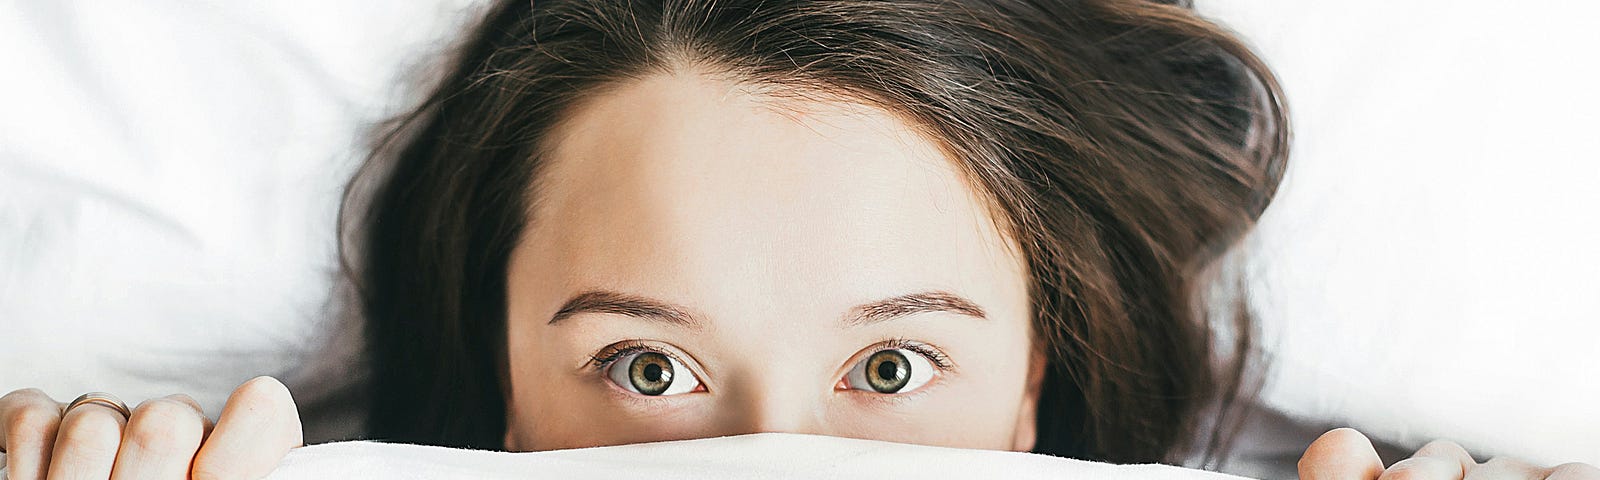 A woman with the bed covers pulled up only exposing her eyes and top of her head.